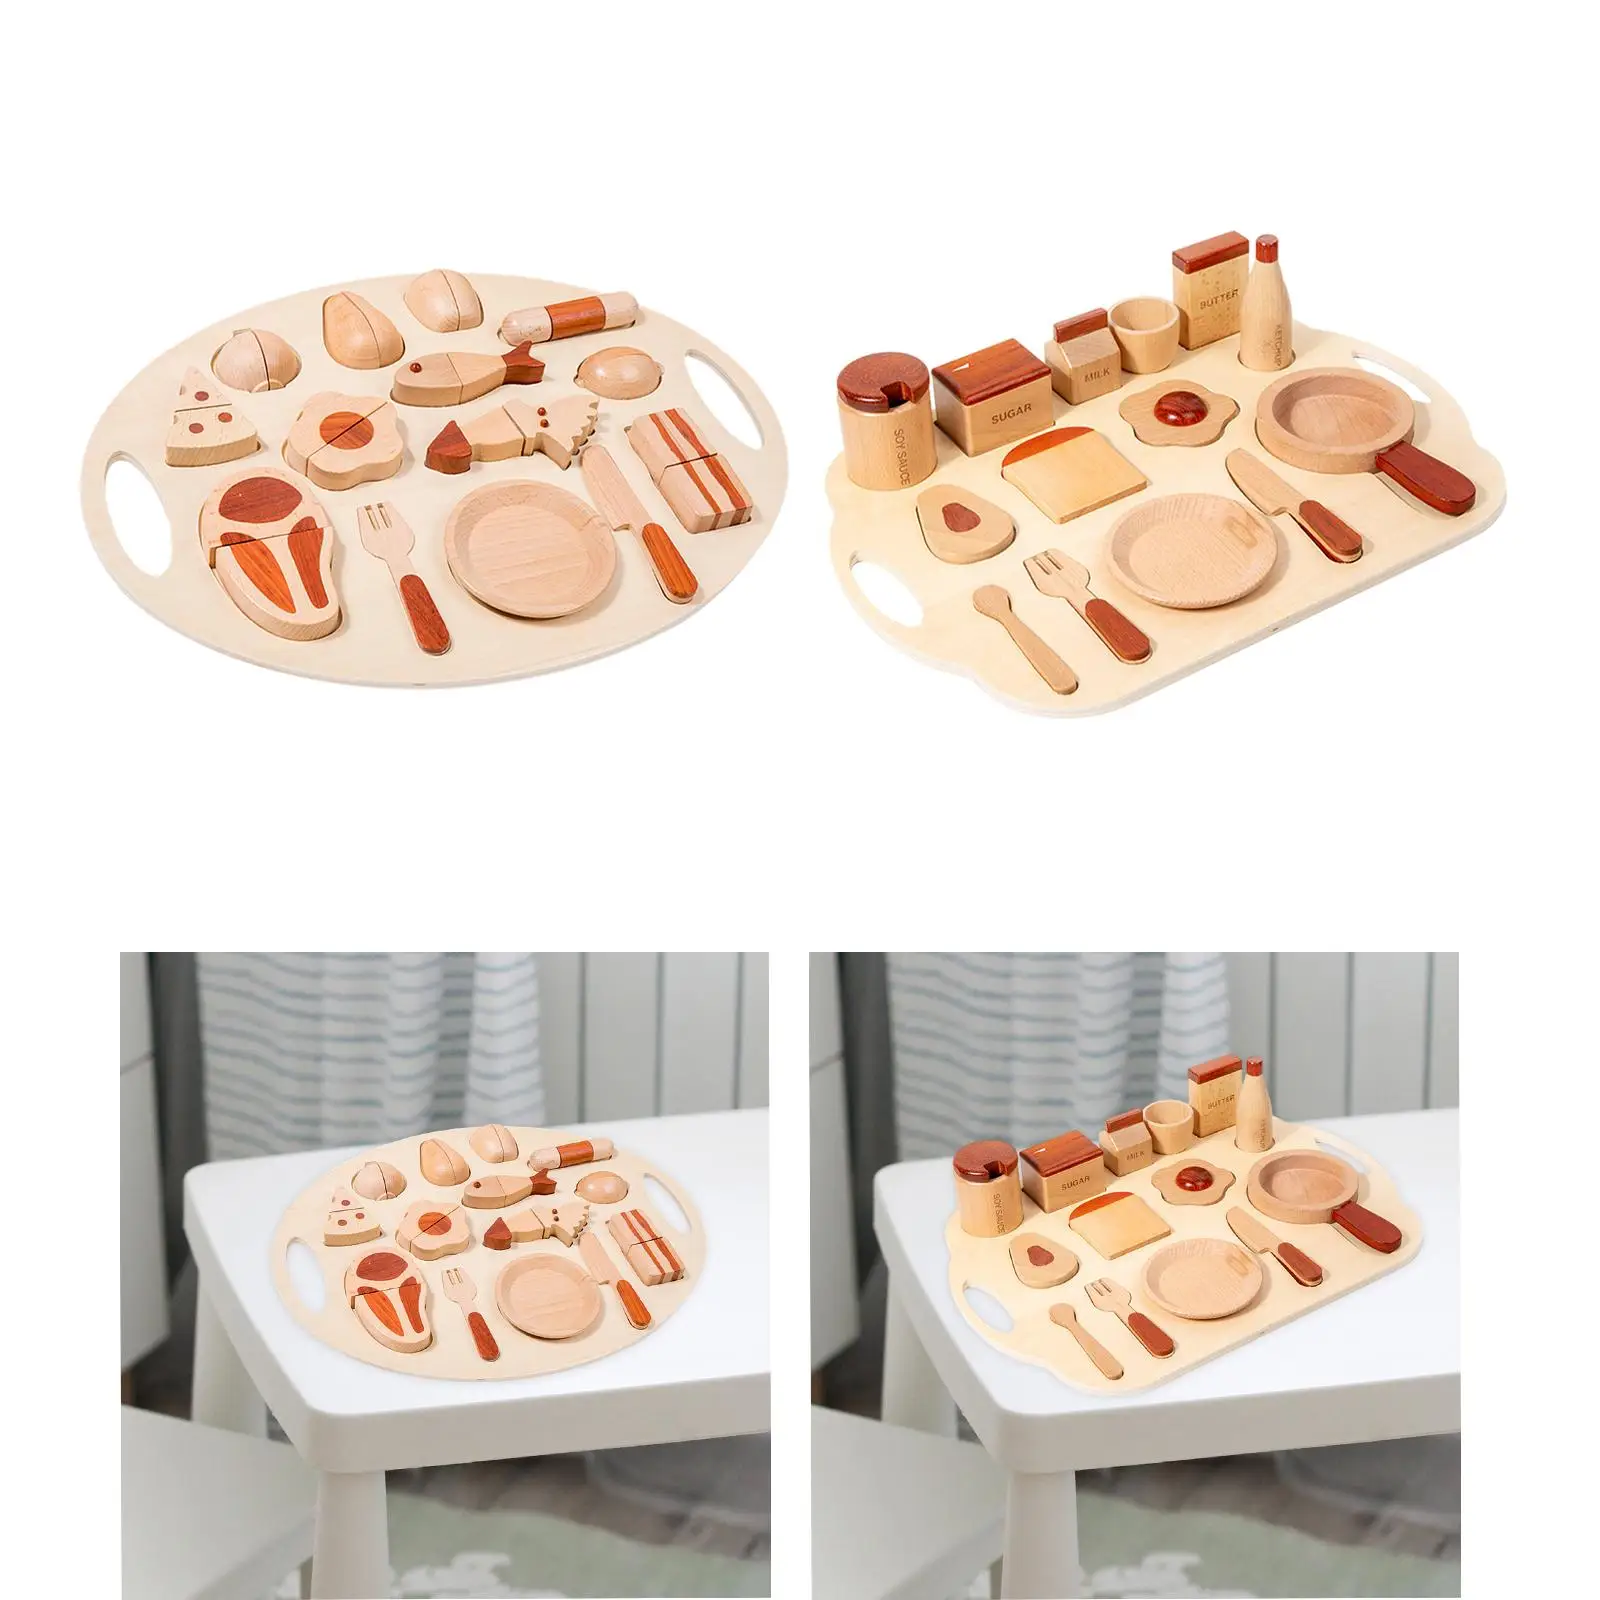 15x Kitchen Accessories Pretend Play Realistic Wood Cutting Fruits Toys